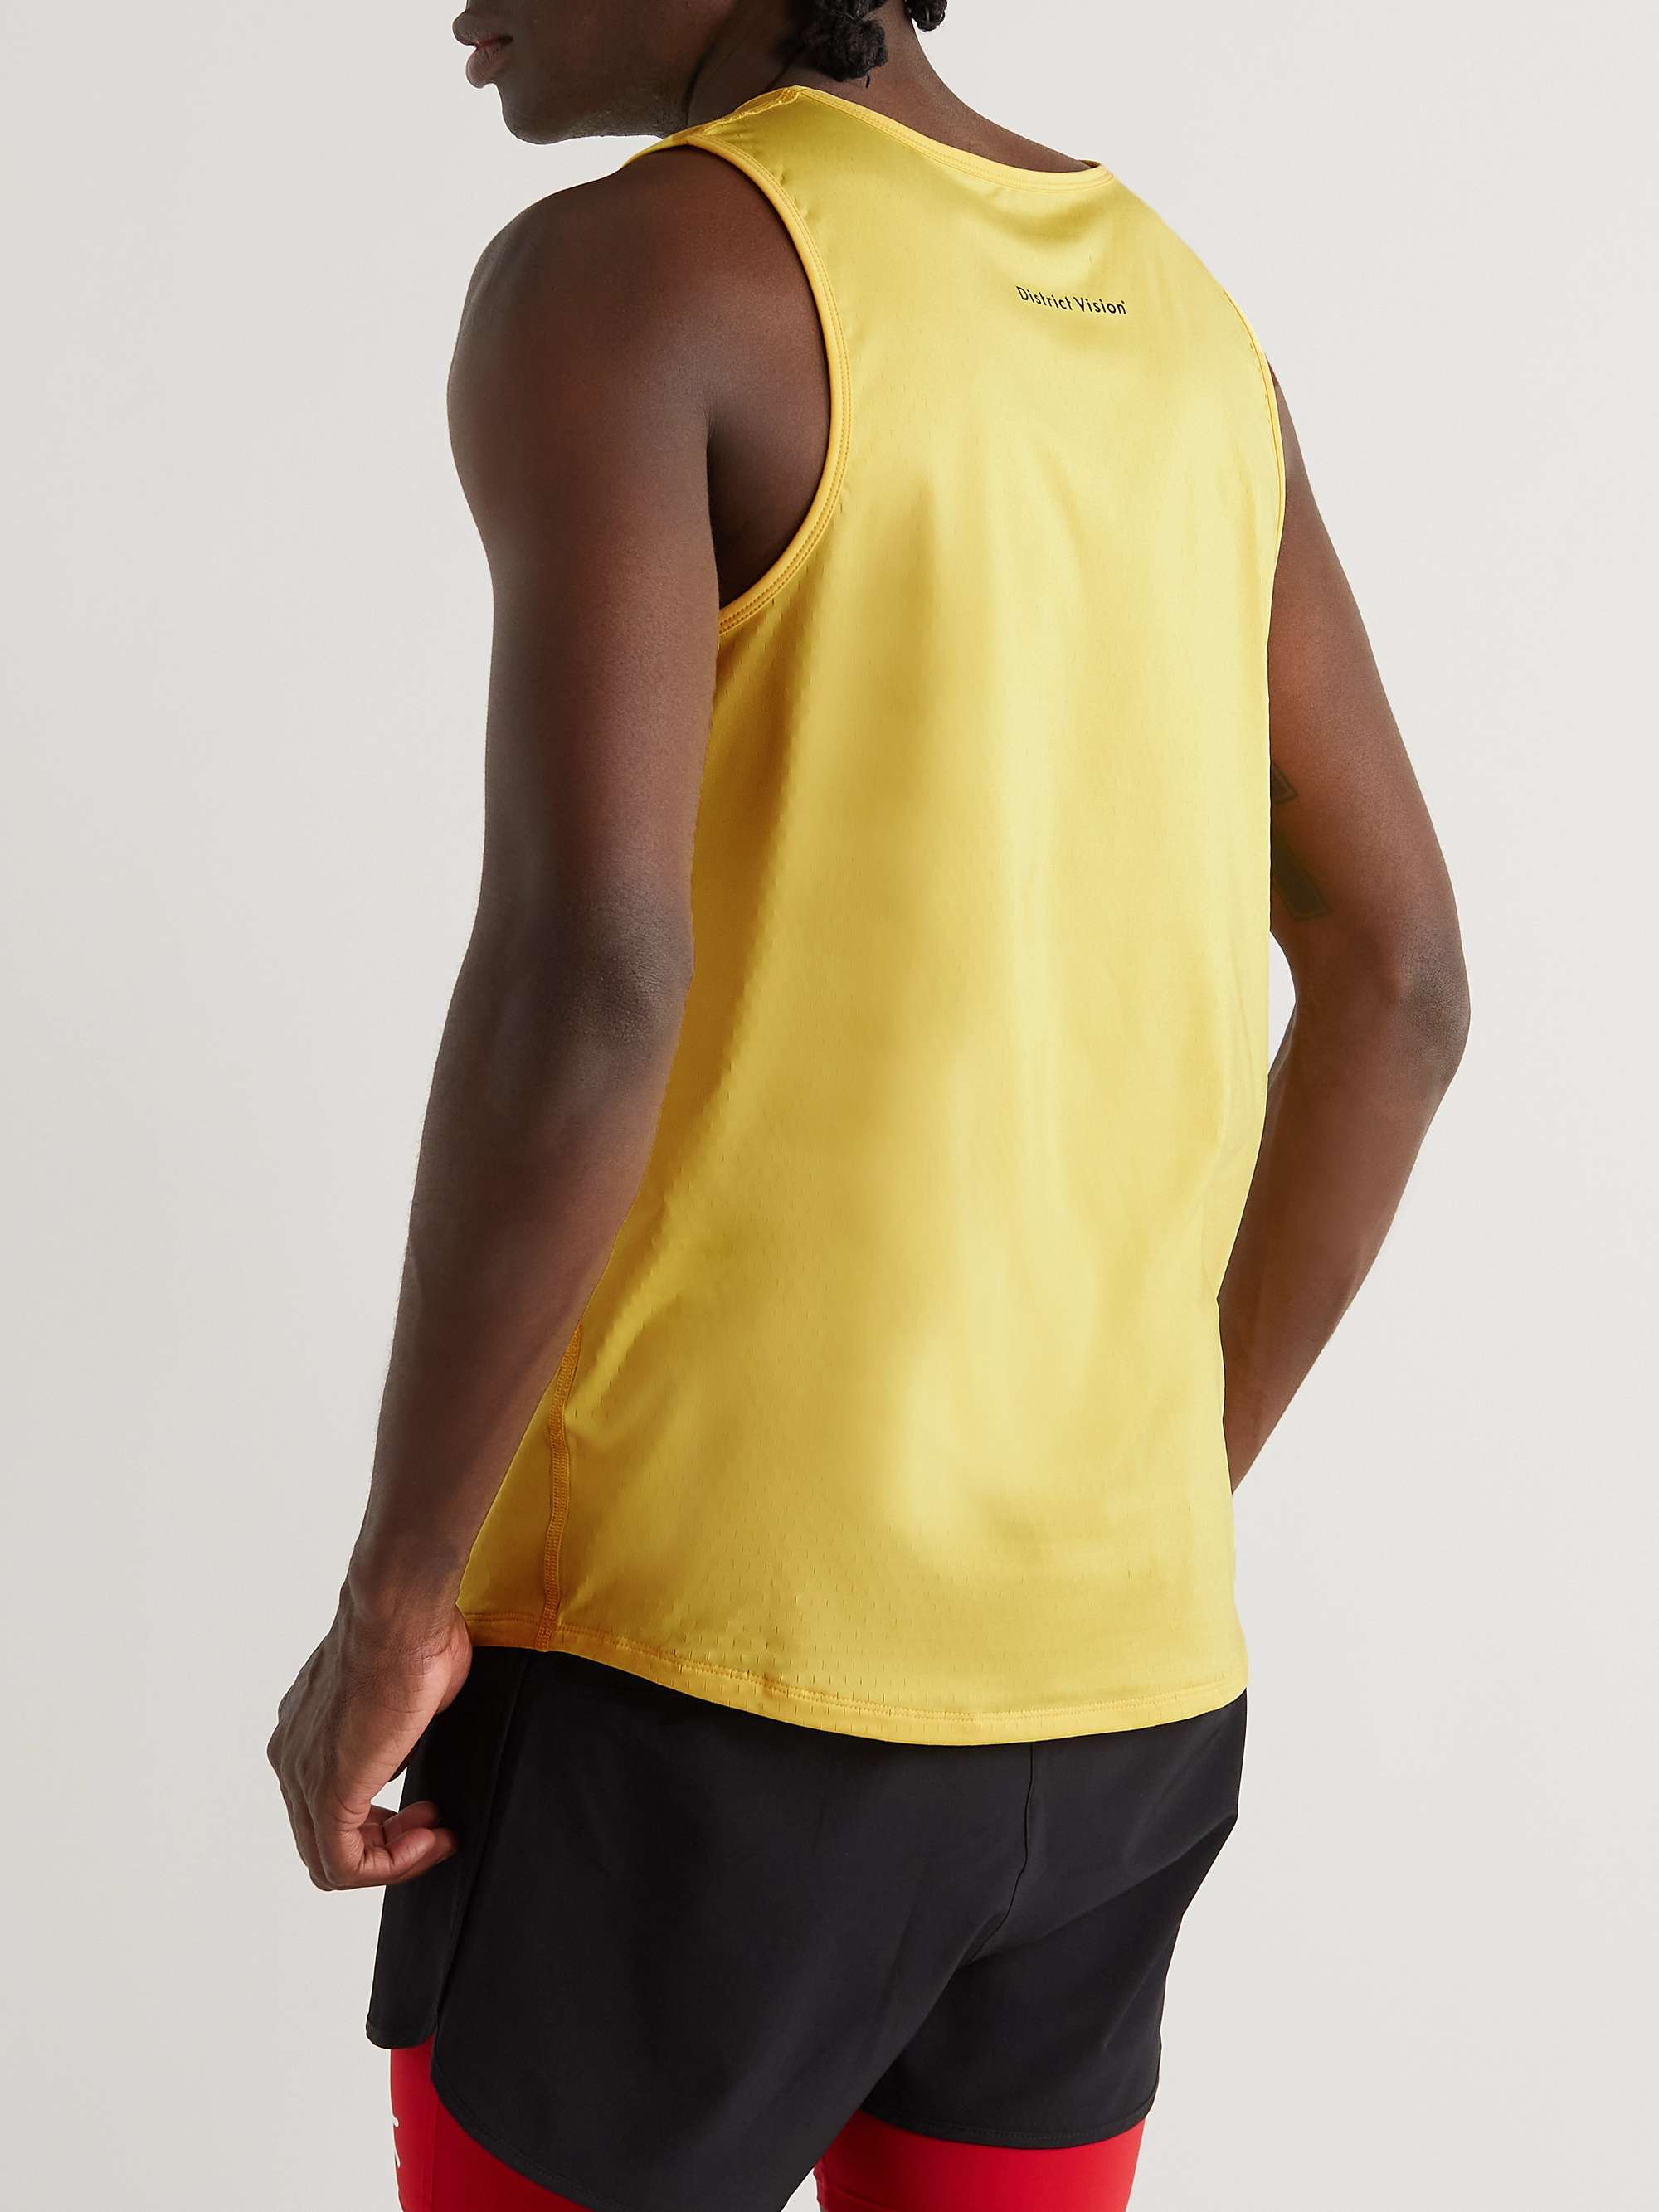 DISTRICT VISION Air-Wear Stretch-Jersey Tank Top